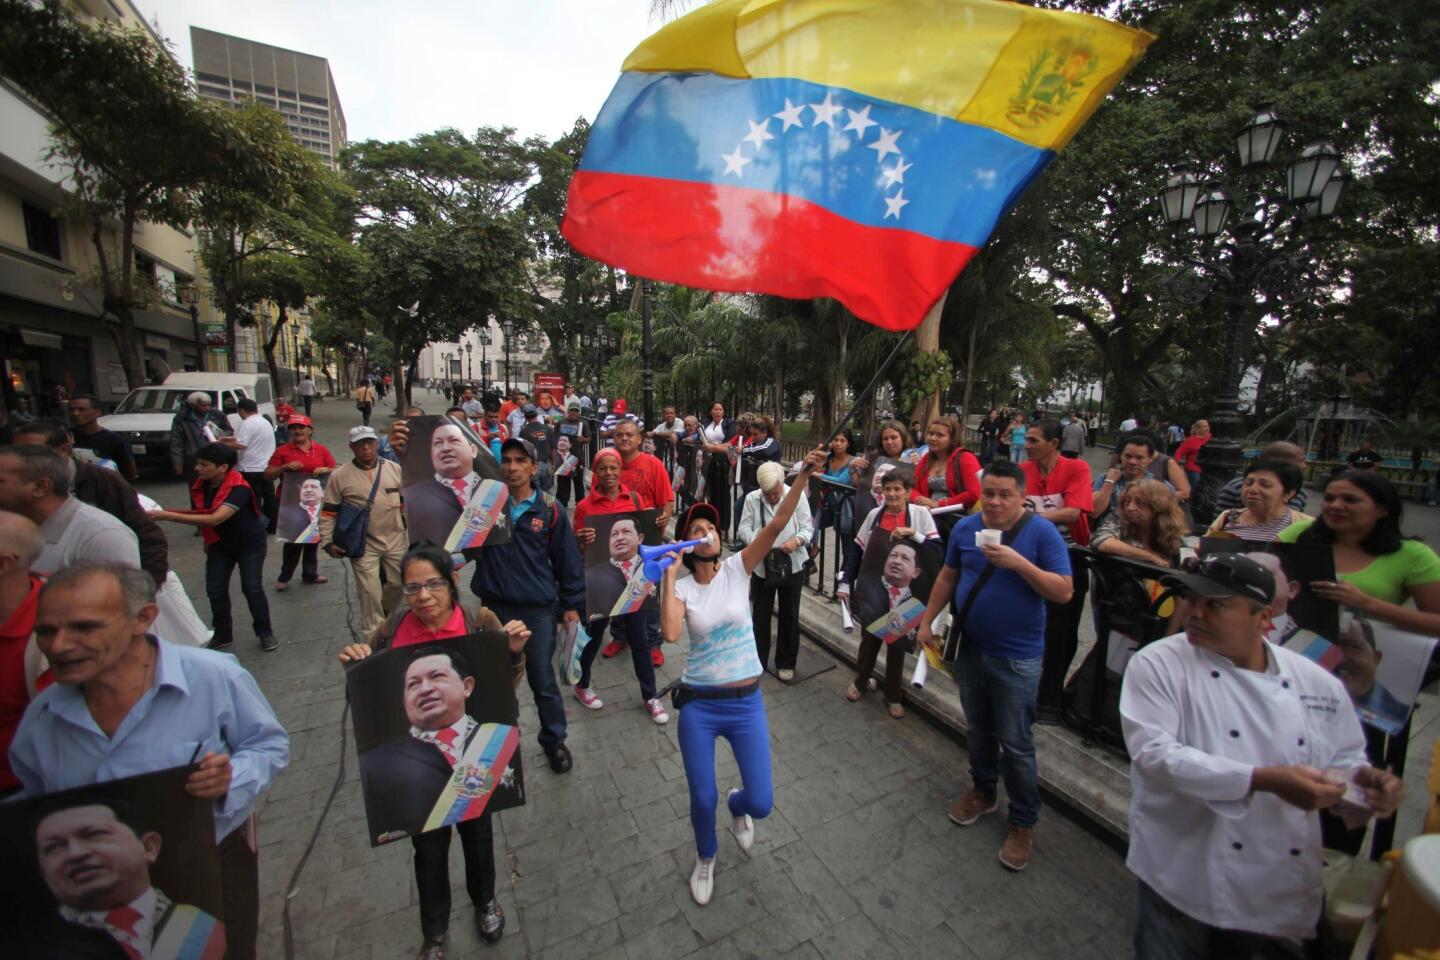 Supporters of Venezuela's President Hugo Chavez celebrate his return to the country at Bolivar Square in Caracas.